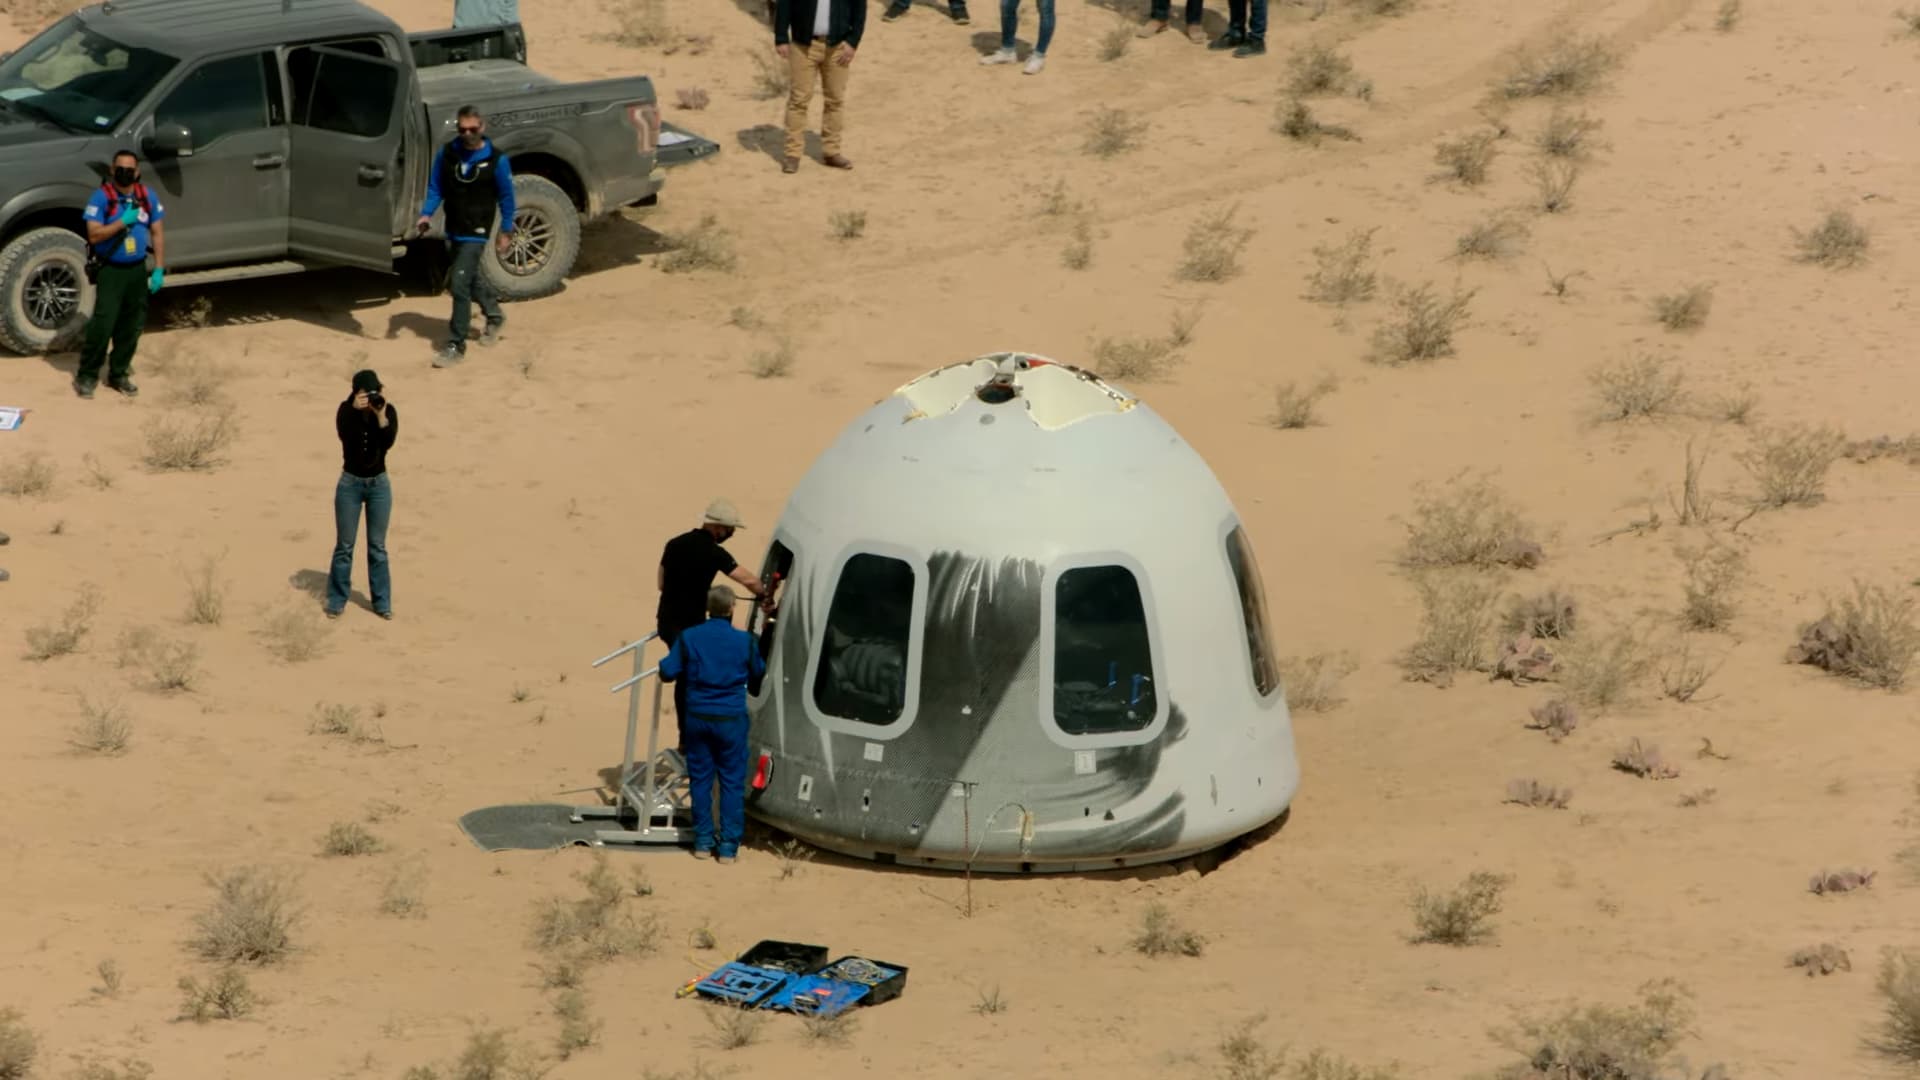 Jeff Bezos opens the hatch of the New Shepard capsule after a test flight in April 2021.